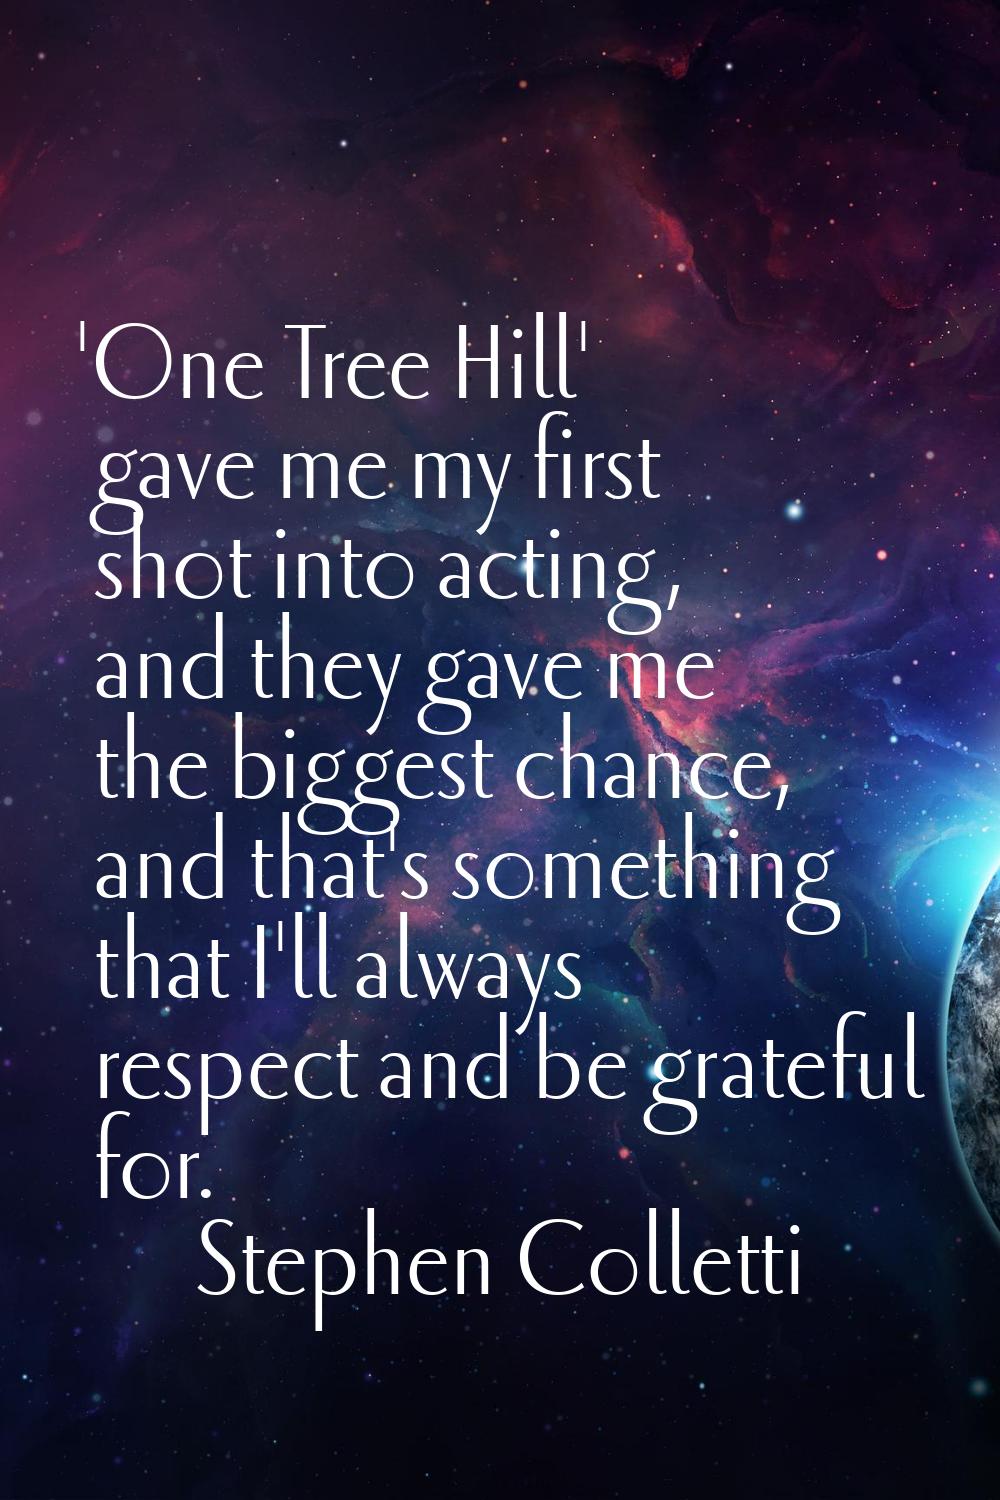 'One Tree Hill' gave me my first shot into acting, and they gave me the biggest chance, and that's 